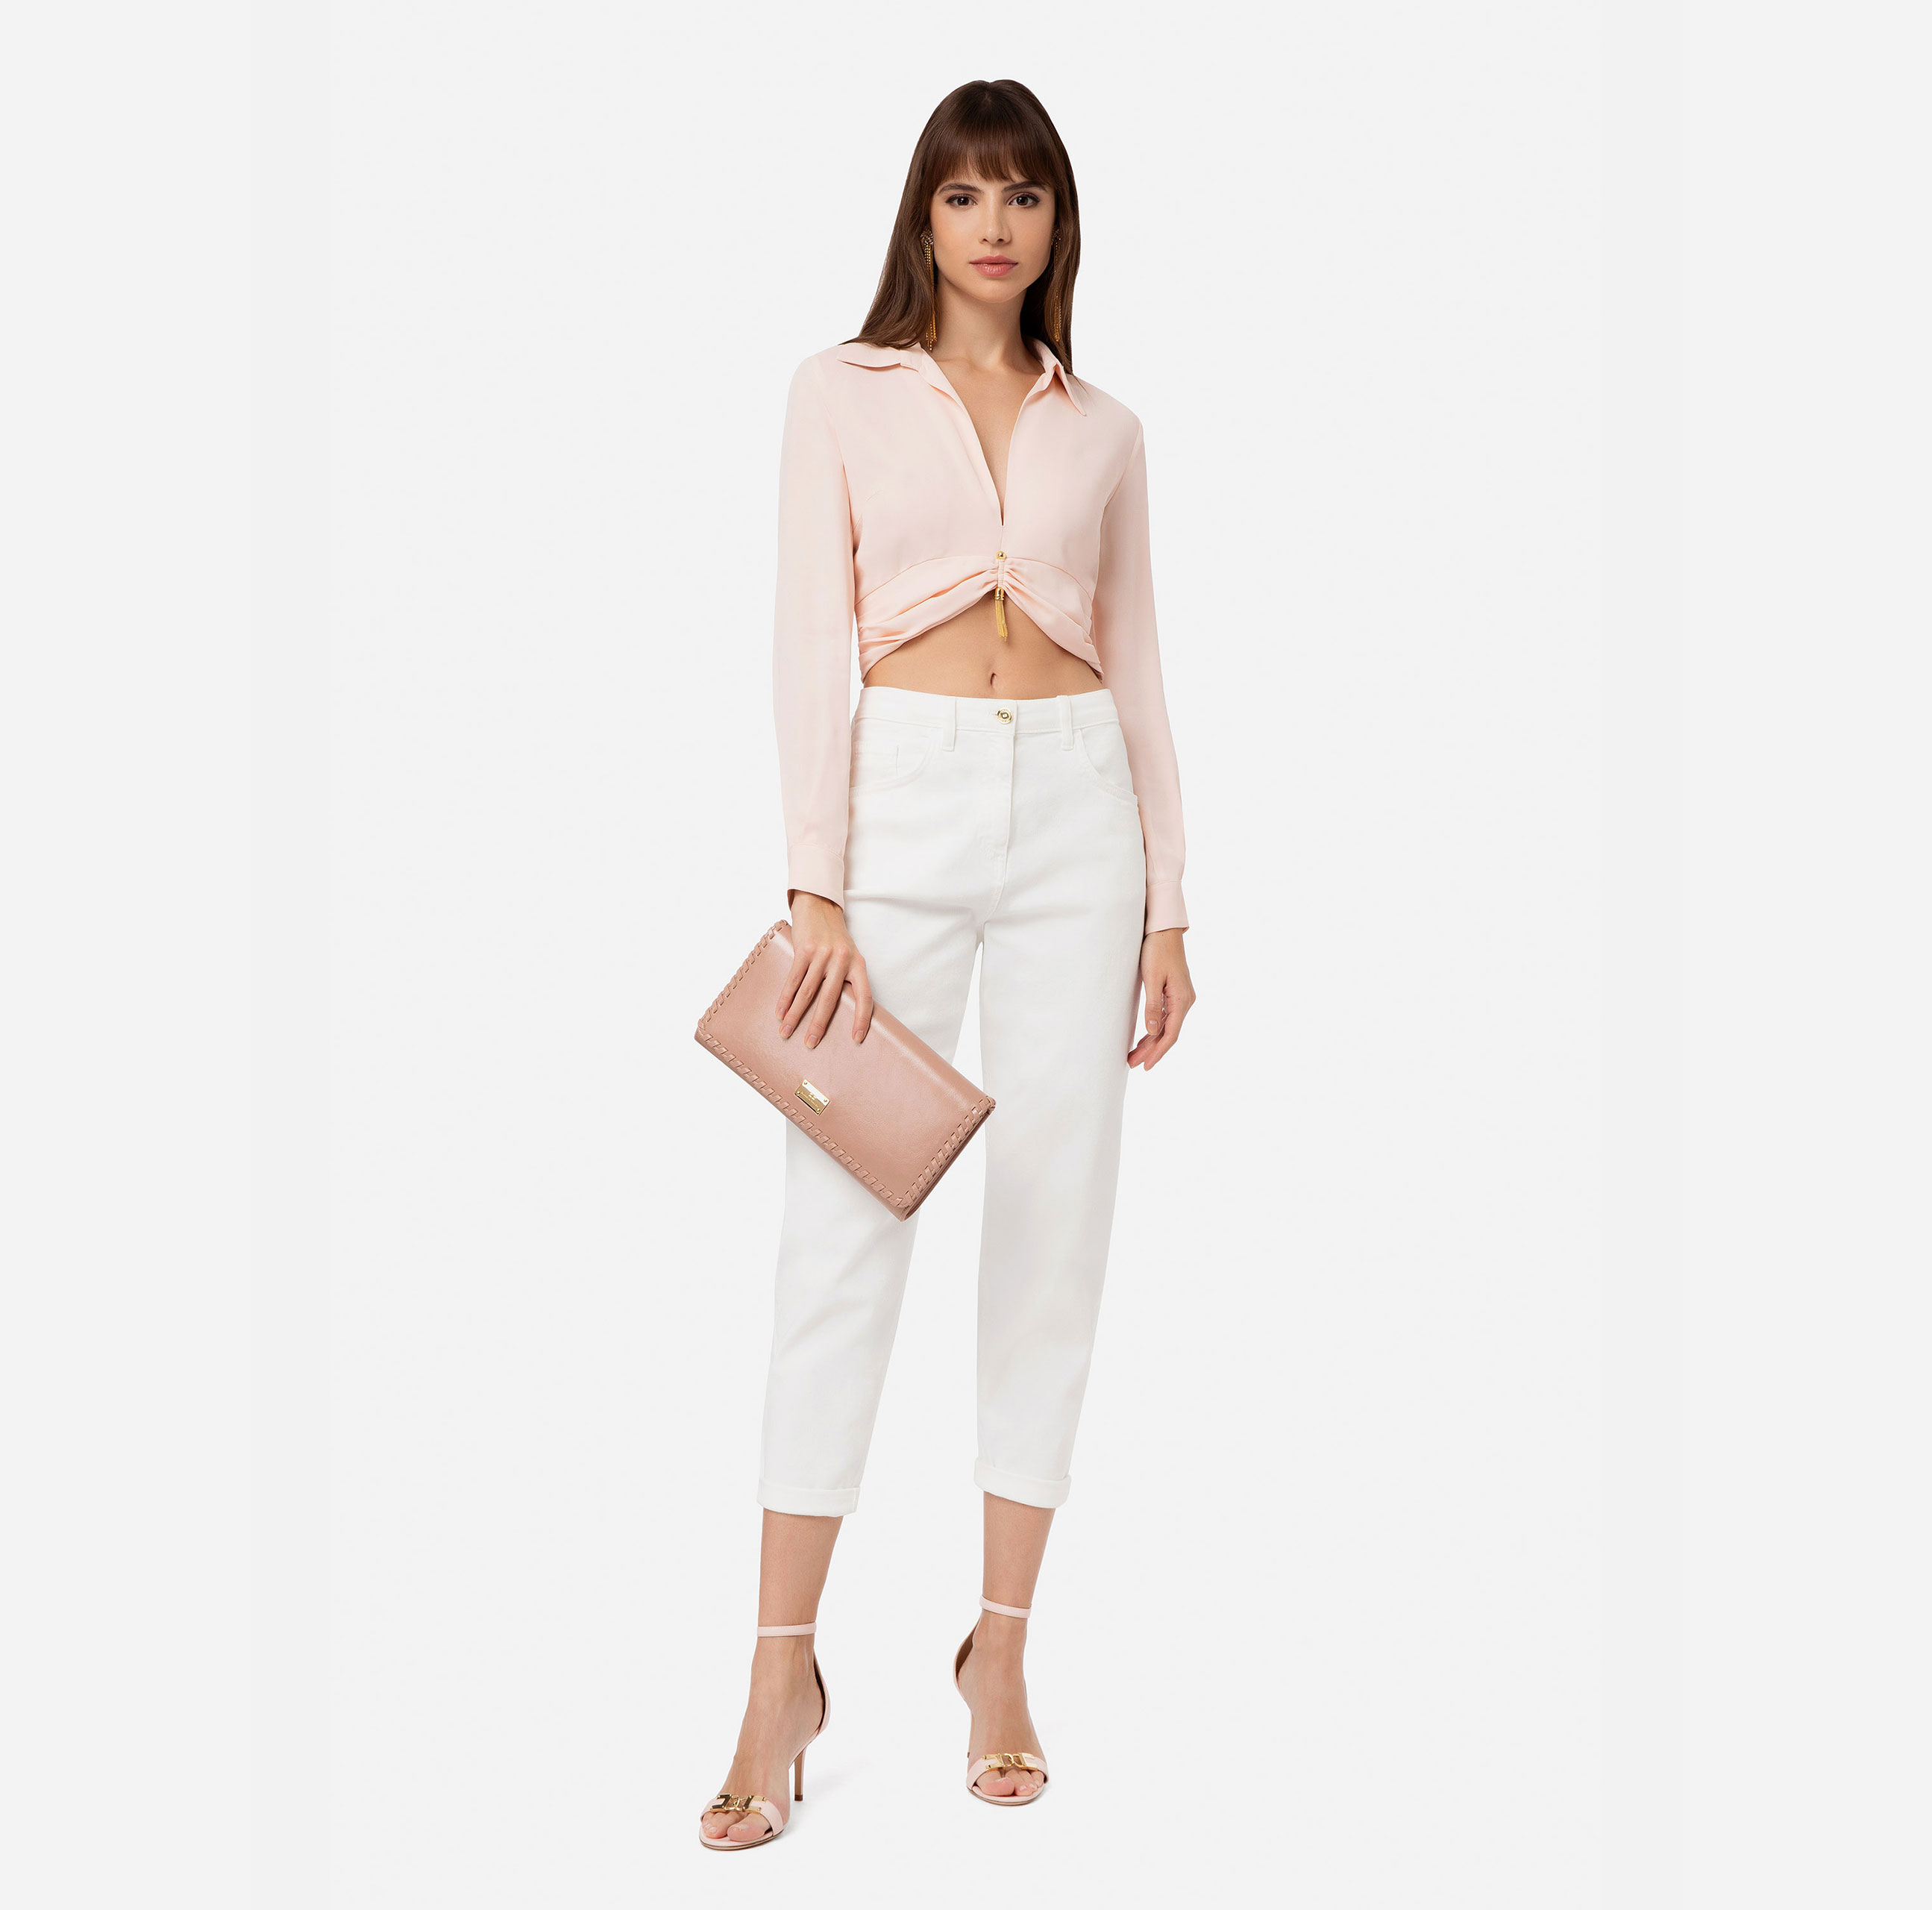 Cropped shirt with collar and V-shaped opening on the front - Elisabetta Franchi